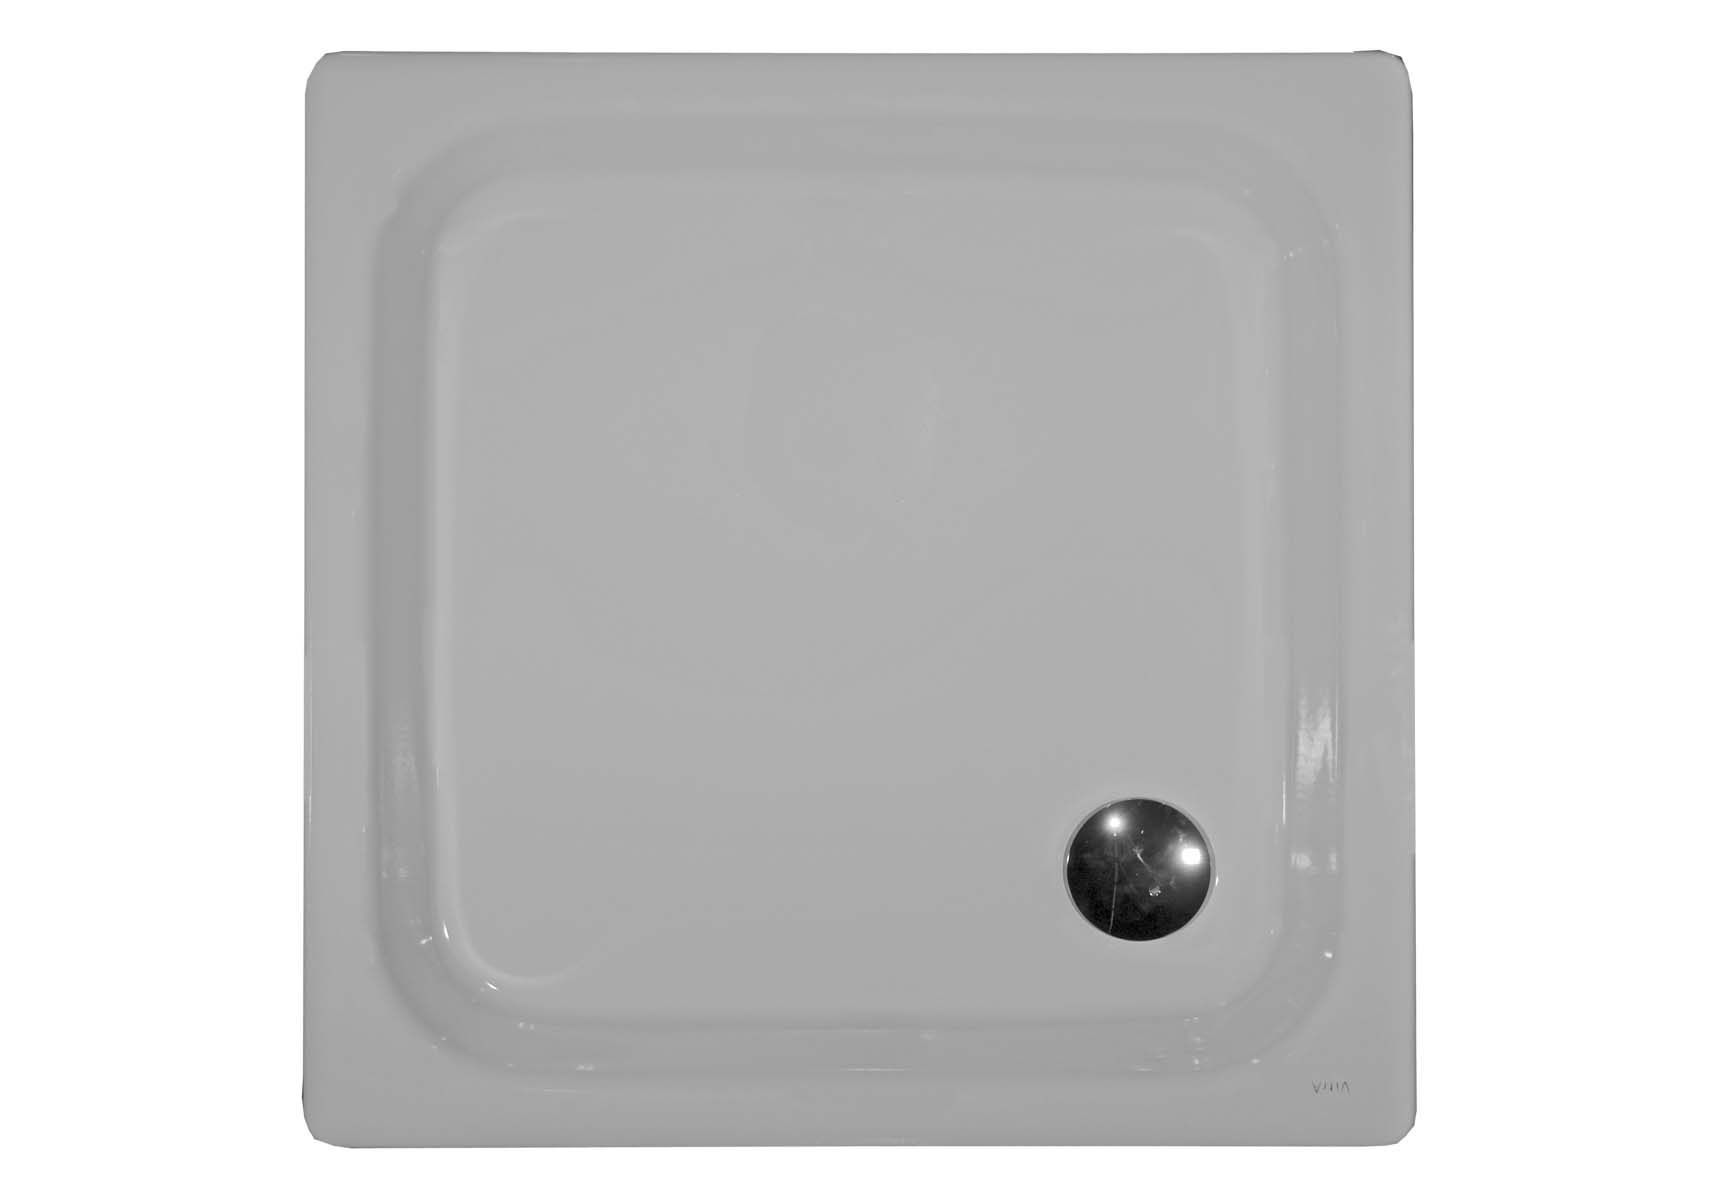 Generic Square 90x90 cm Steel Shower Tray, 3.5 Mm, H:6.5 cm, 90 Mm Waste, Sound Proofing Pad